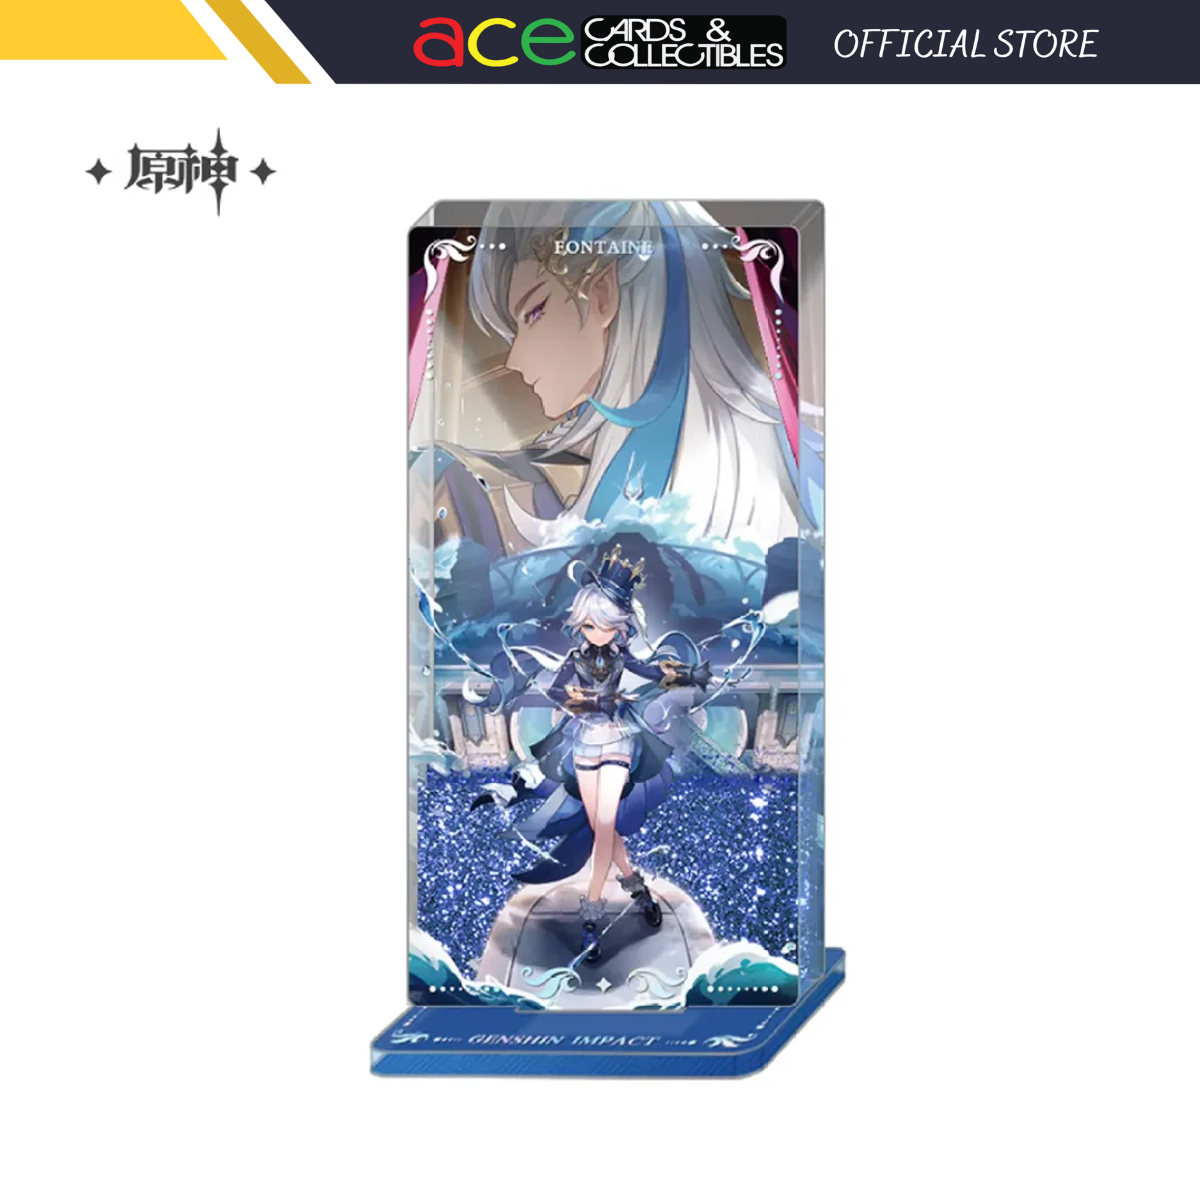 miHoYo Genshin Impact Masquerade of the Guilty Quicksand Acrylic Stand-miHoYo-Ace Cards & Collectibles